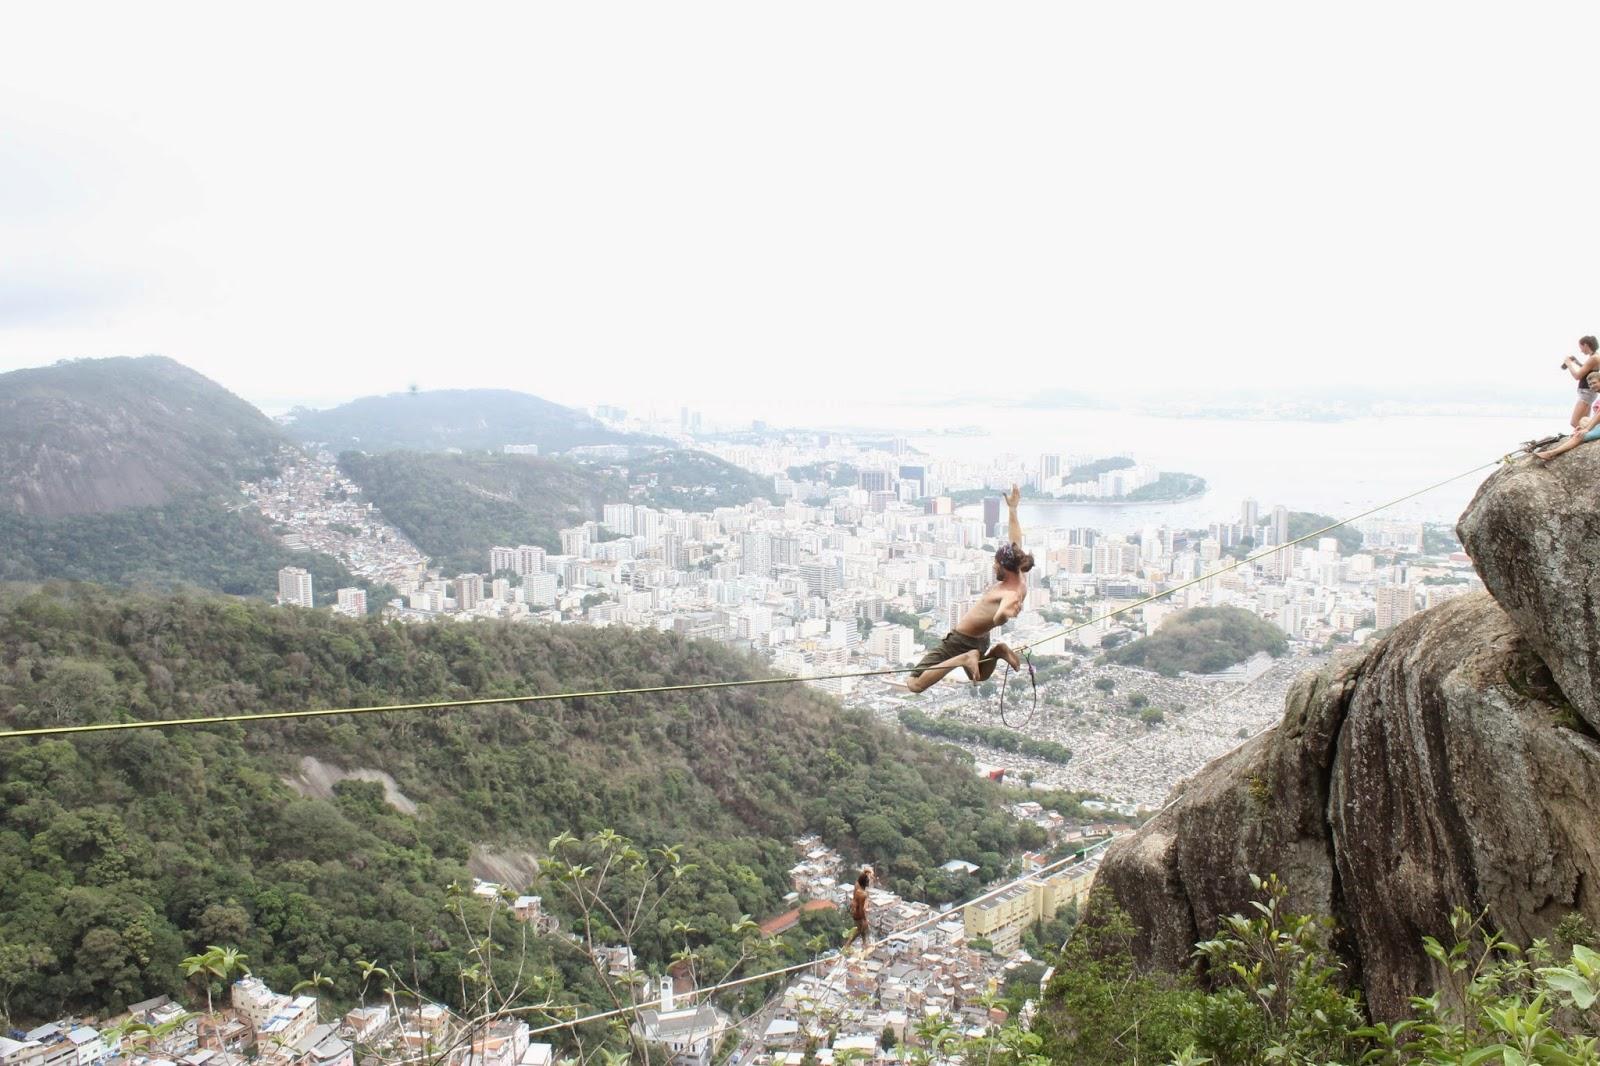 Part 2 - Brazil : Laure Millot and Co